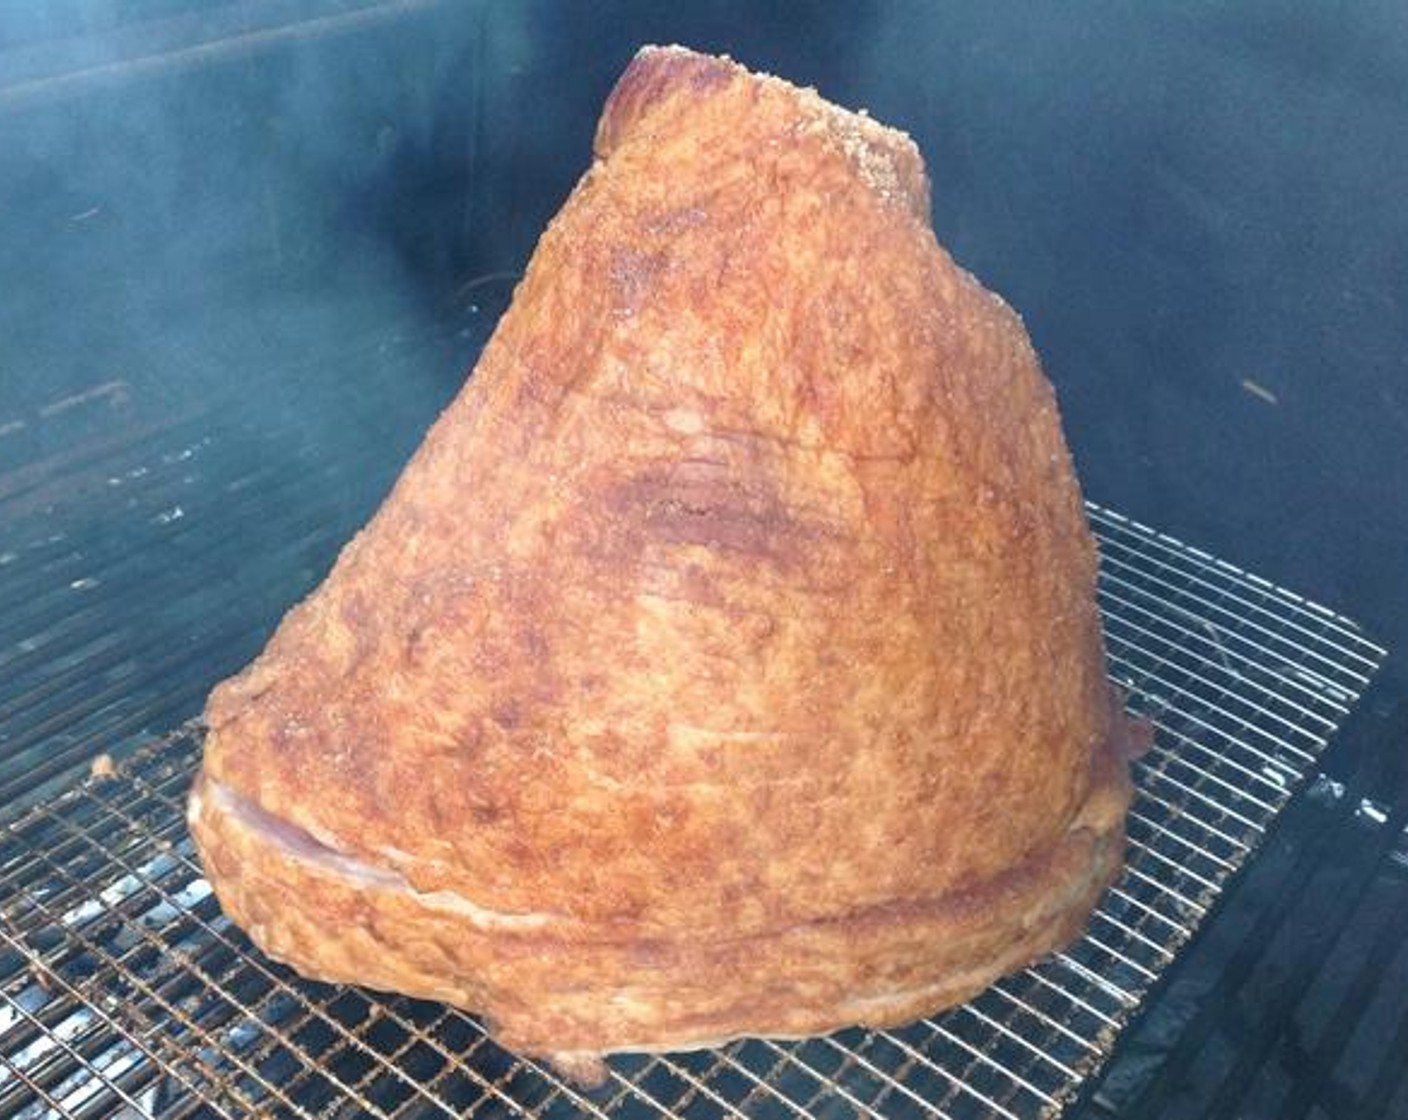 step 6 Place the ham on the smoker and check it every hour. If the outside starts to look a little dry, use some of the glaze for basting. The entire cook is only going to take about 2 1/2 – 3 hours.